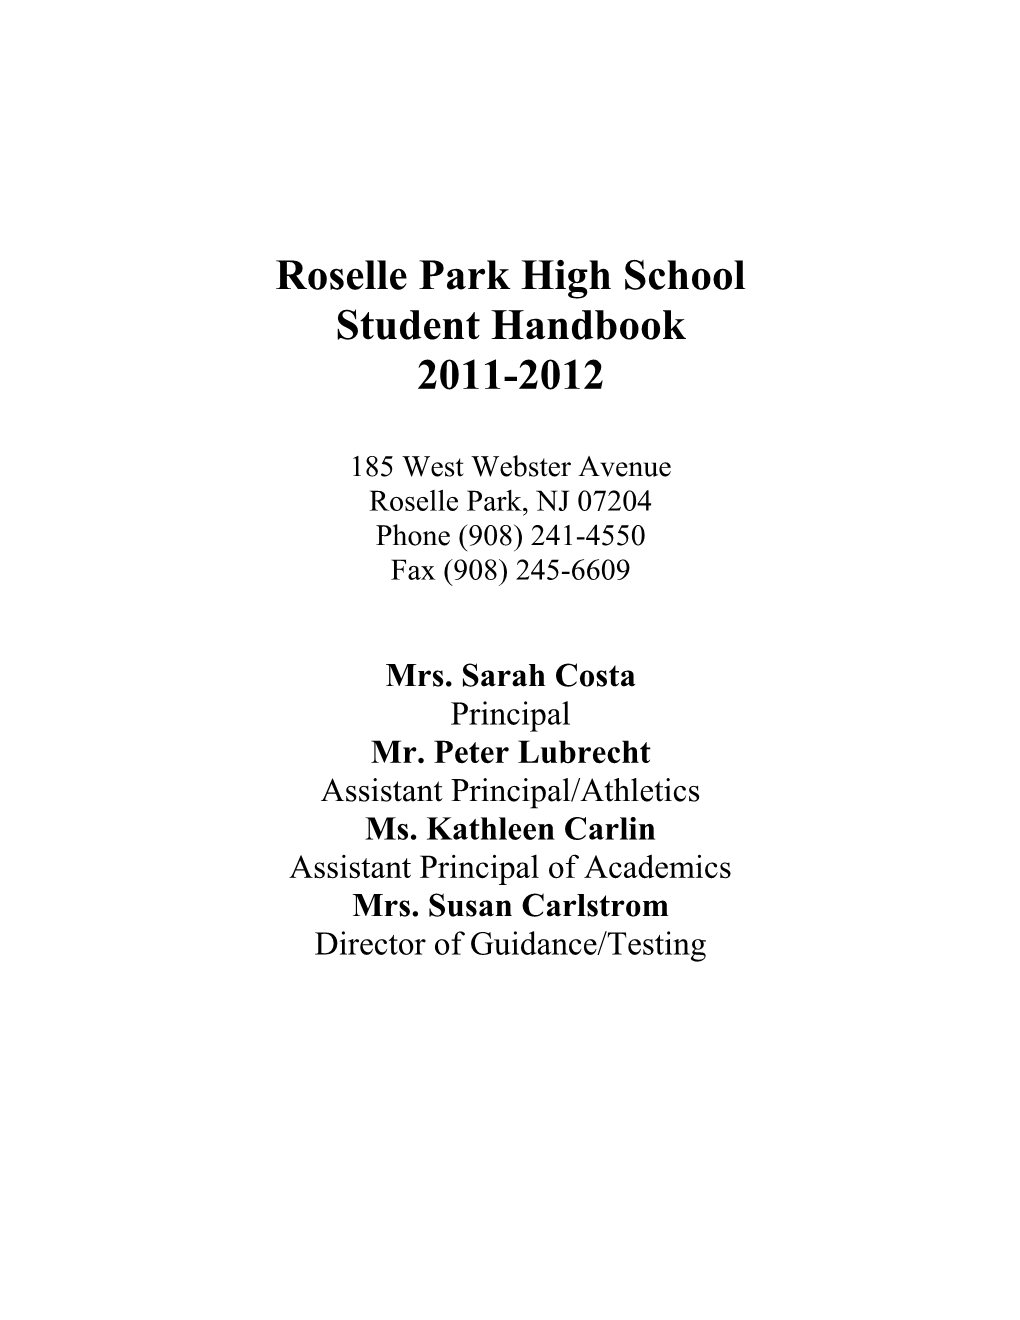 Roselle Park High School Student Code of Conduct